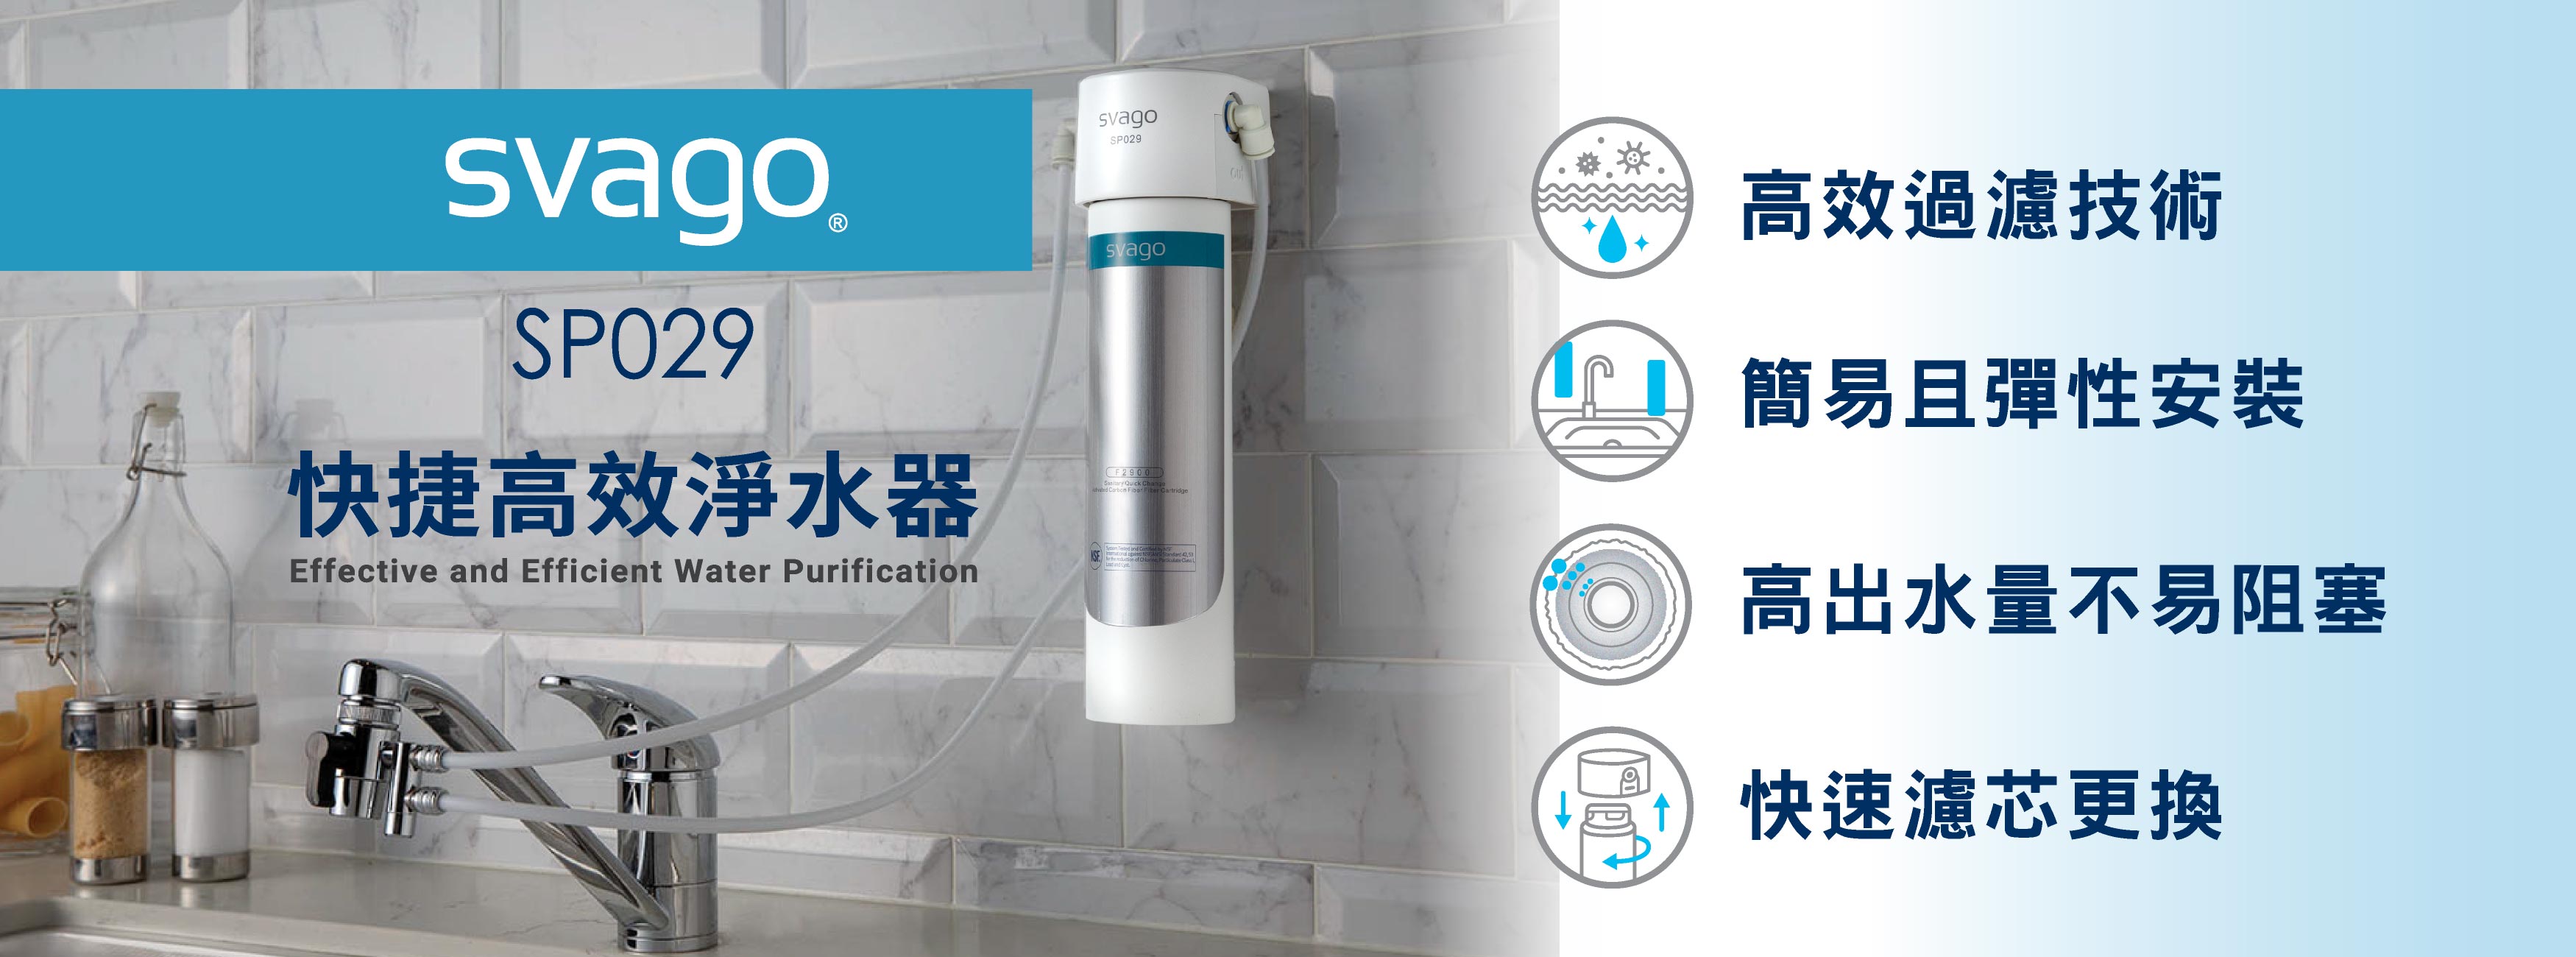 Water Purifier ProductPage Web Banner_3500x1300